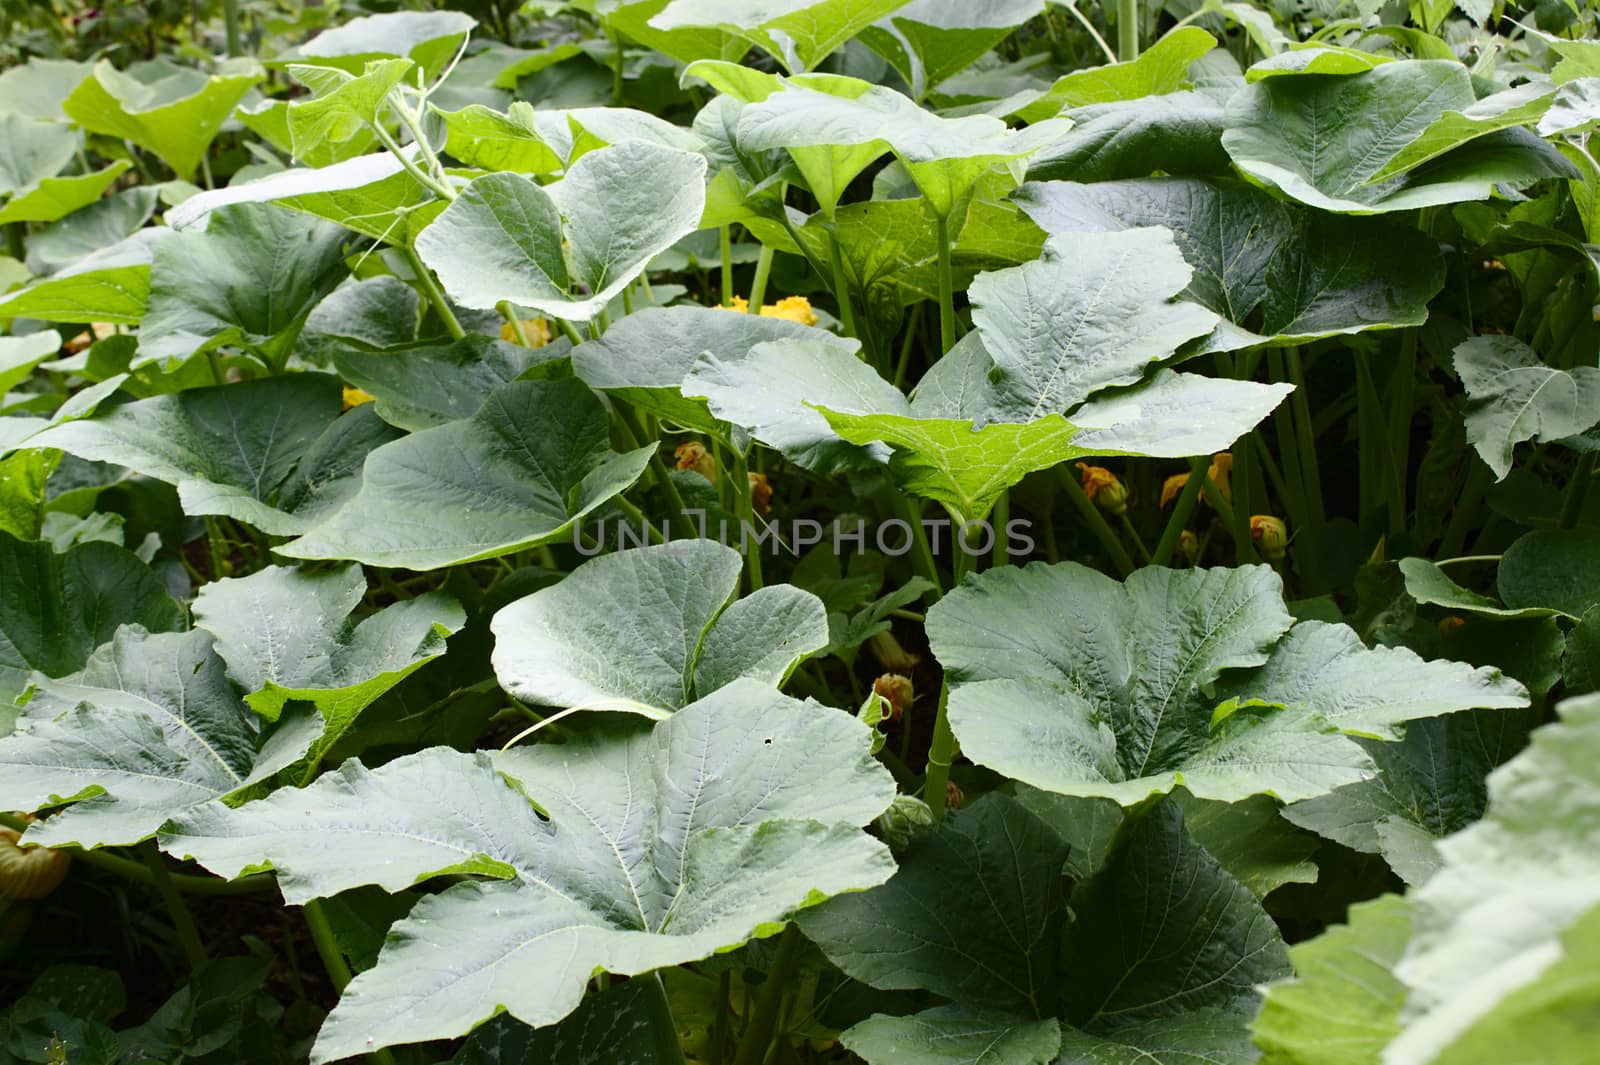 The picture shows pumpkin plants with blossoms in the garden